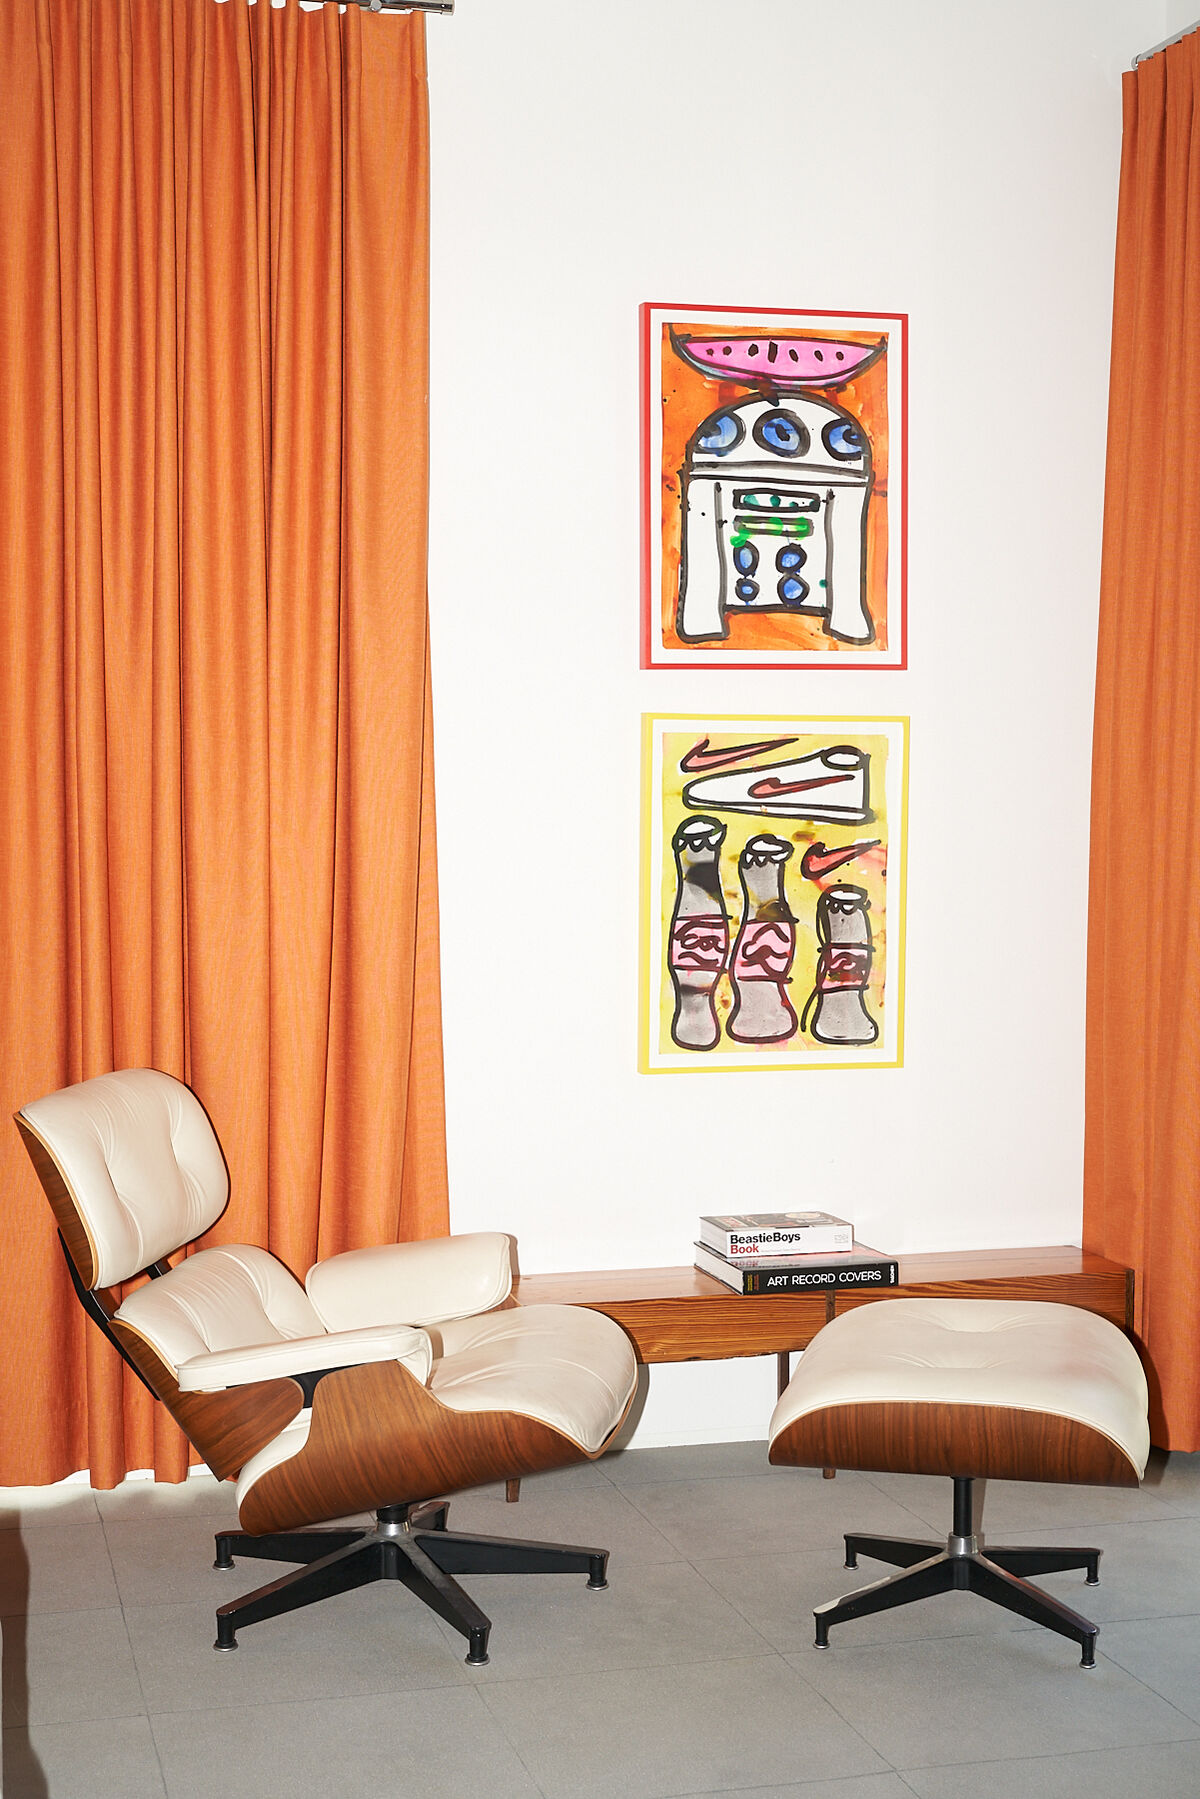 Interior view of Joe and Kristen Cole’s Dallas home featuring artwork by Katherine Bernhardt. Photo by Katy Shayne. Courtesy of Joe and Kristen Cole.